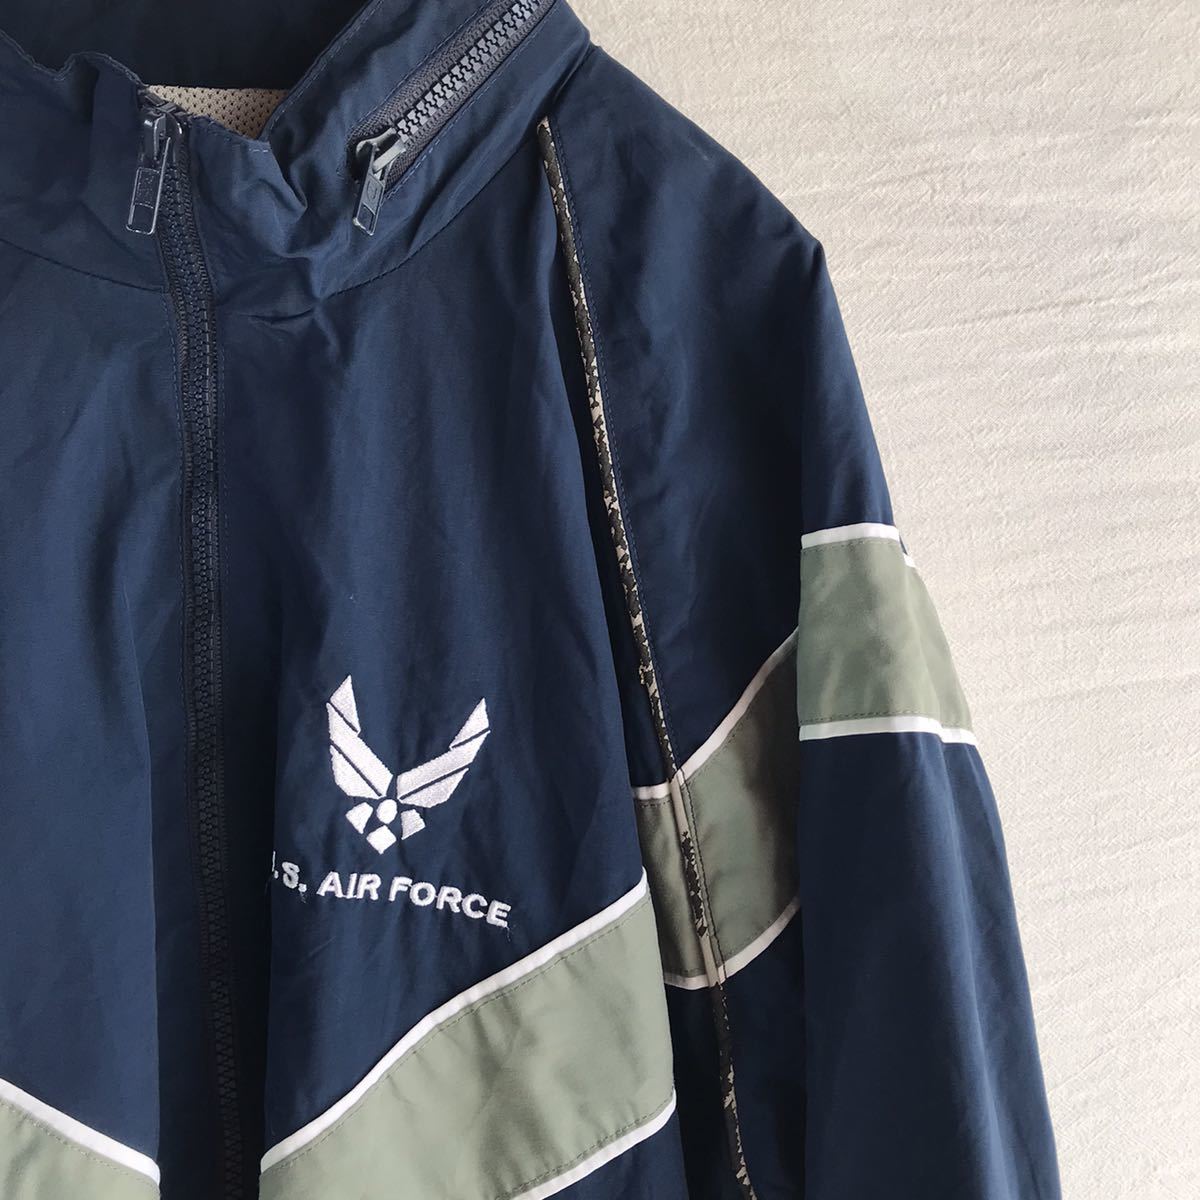 00s US AIRFORCE 米軍 空軍 ミリタリー ナイロンジャケット